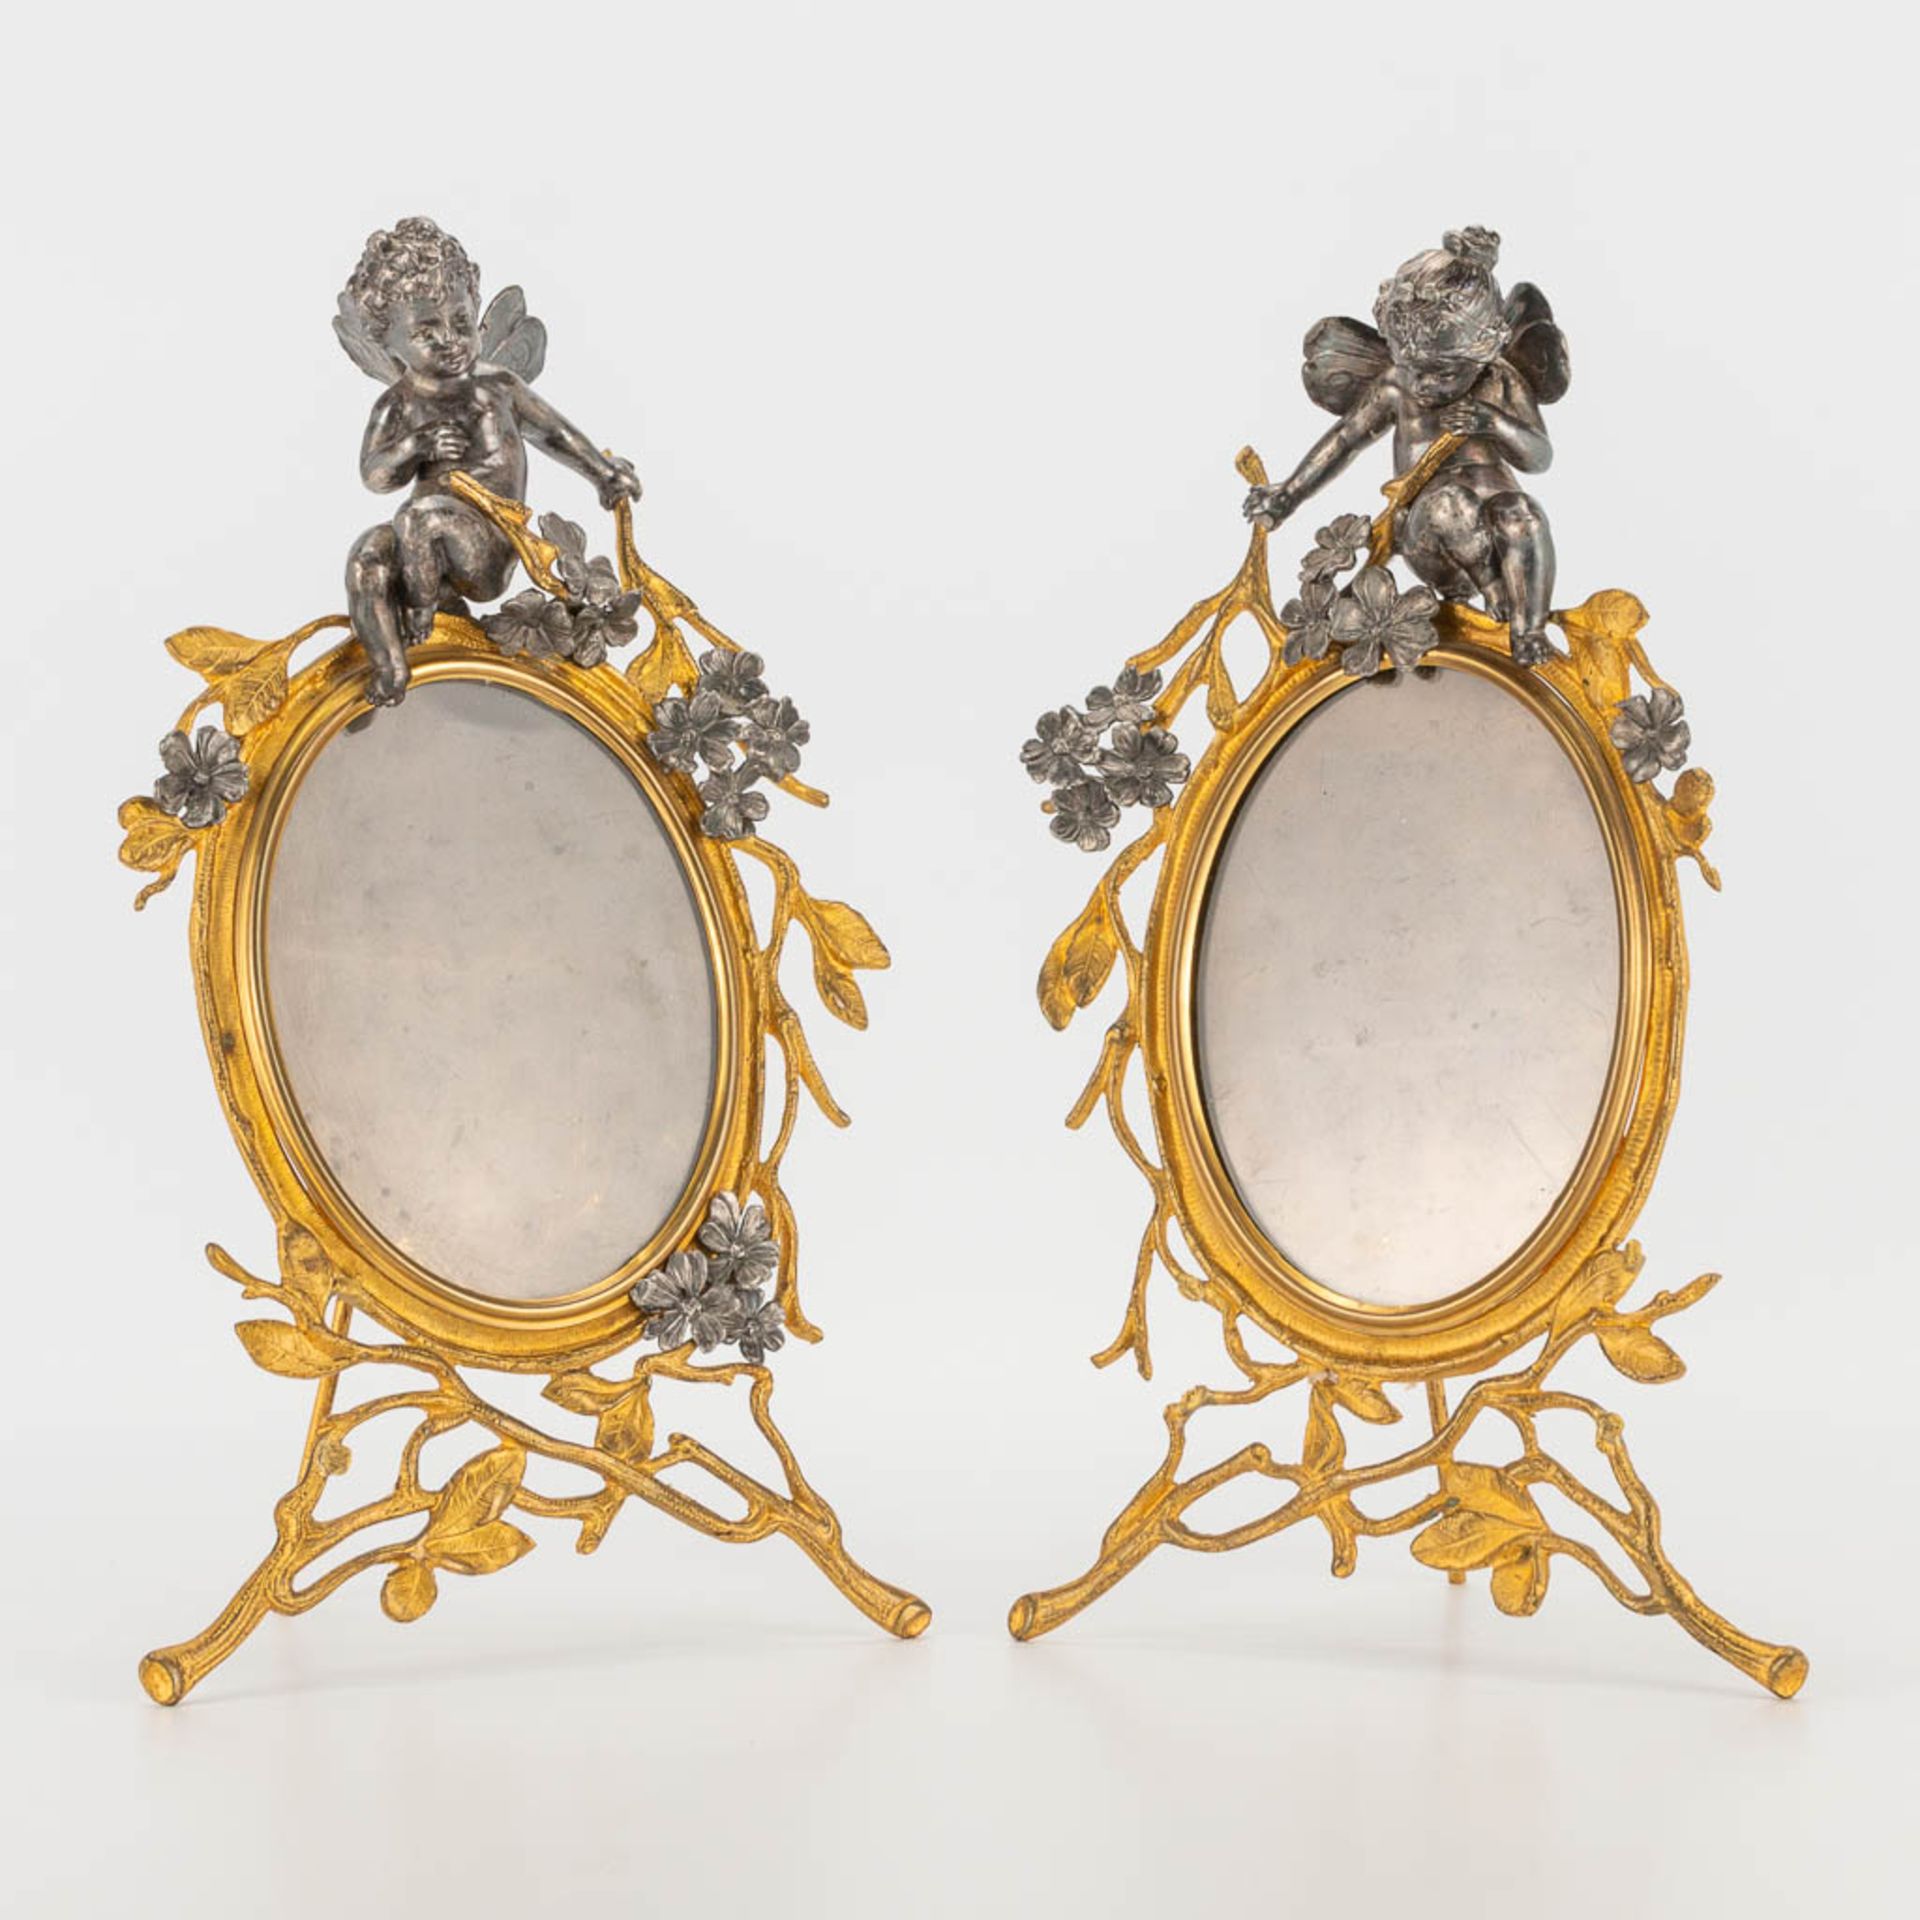 A pair of picture frames made of gold-plated bronze with silver-plated putti. 19th century. (17 x 29